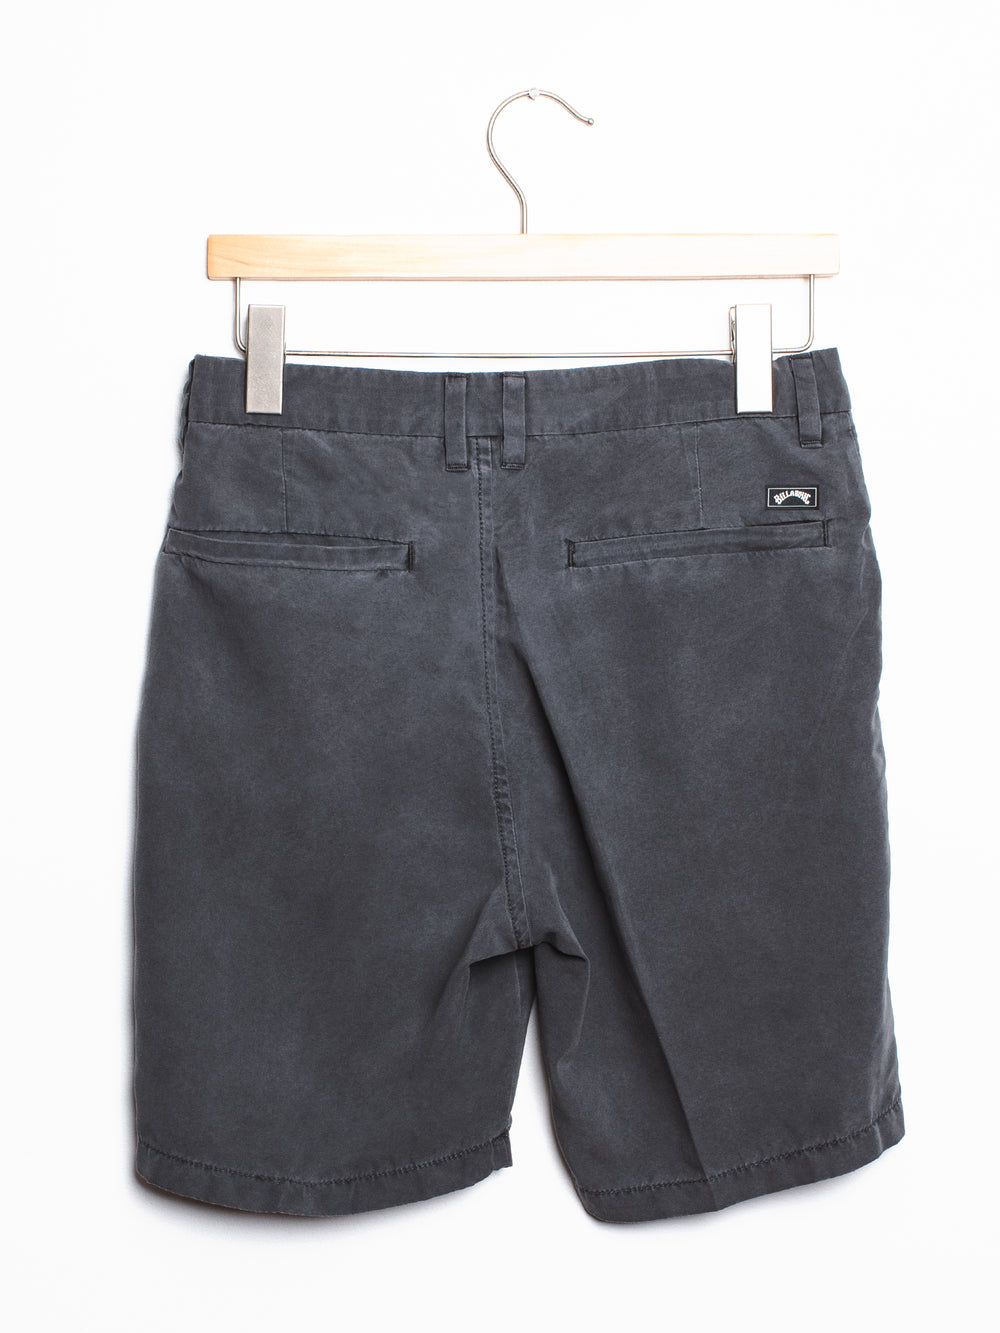 MENS NEW ORDER OVD 19' SHORT - BLK - CLEARANCE